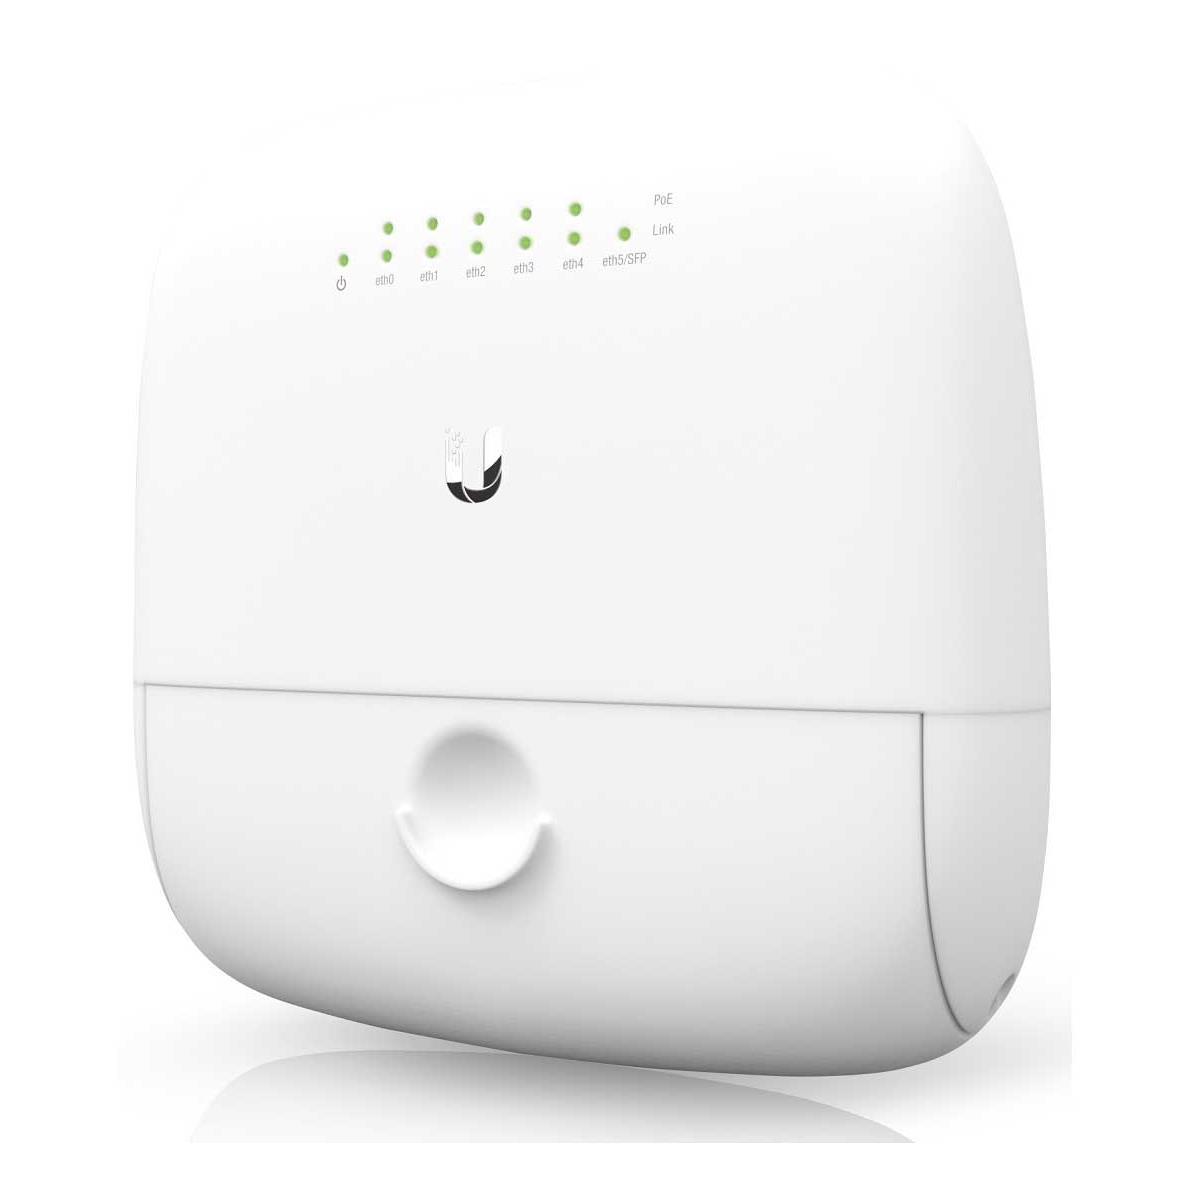 Image of Ubiquiti Networks EP-R6 EdgePoint WISP Gigabit Router